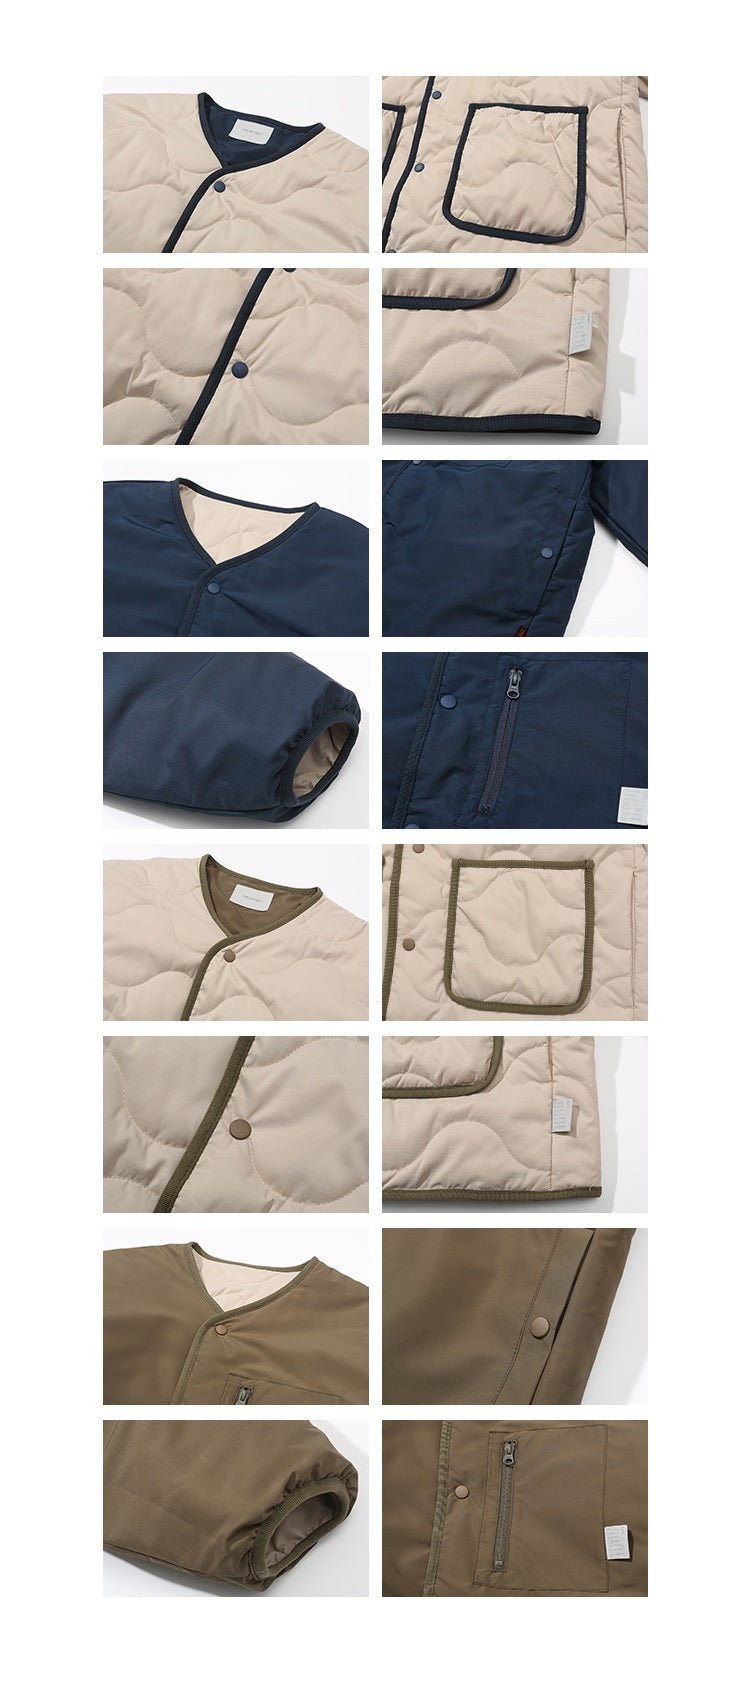 Reversible No Color thermocite Jacket N1543 - NNine